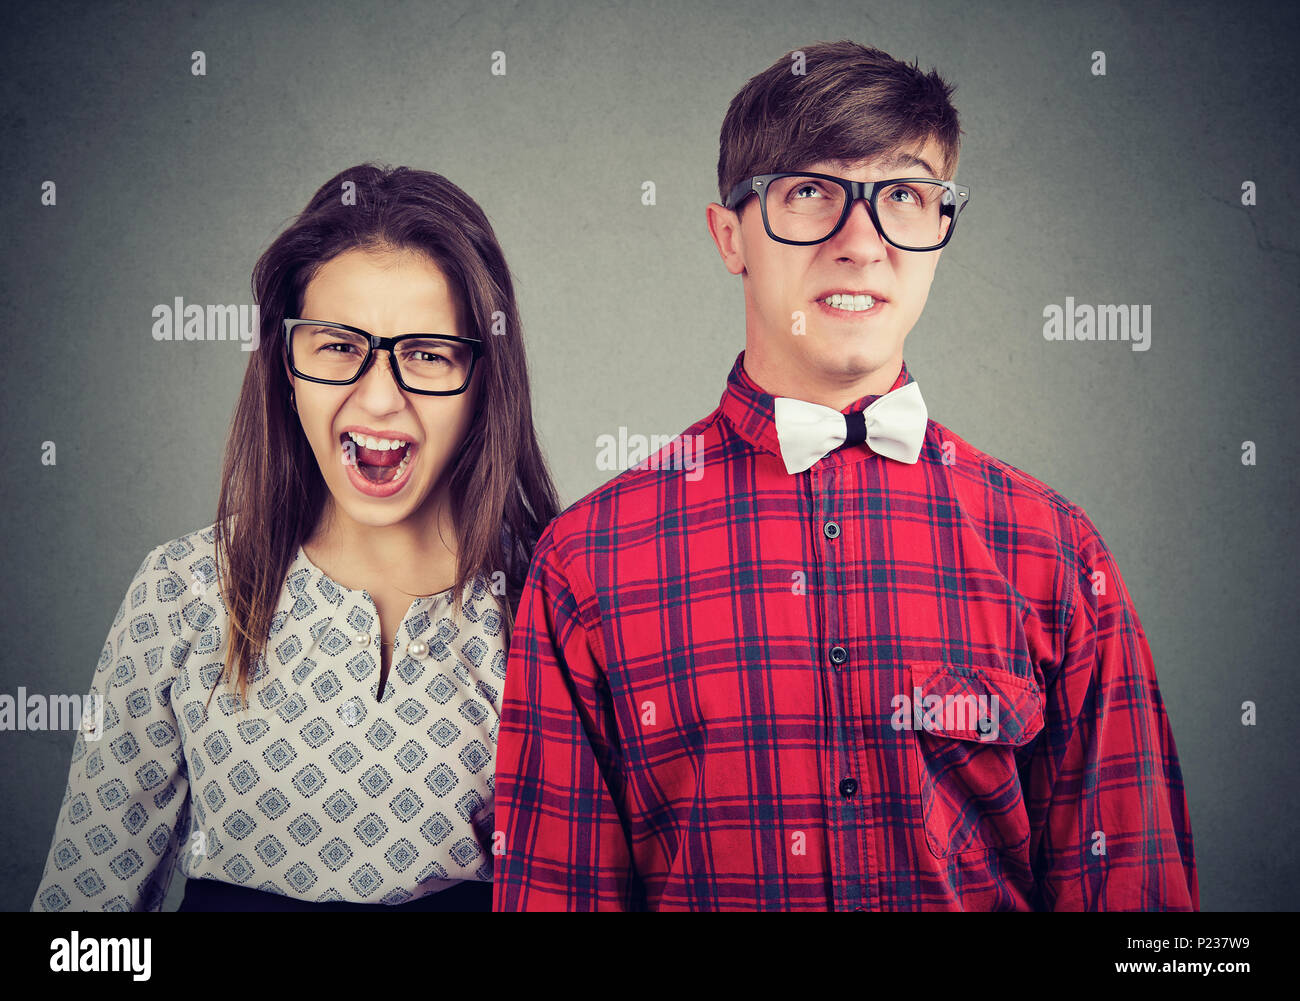 Angry mad woman screaming and fearful annoyed stressed man Stock Photo